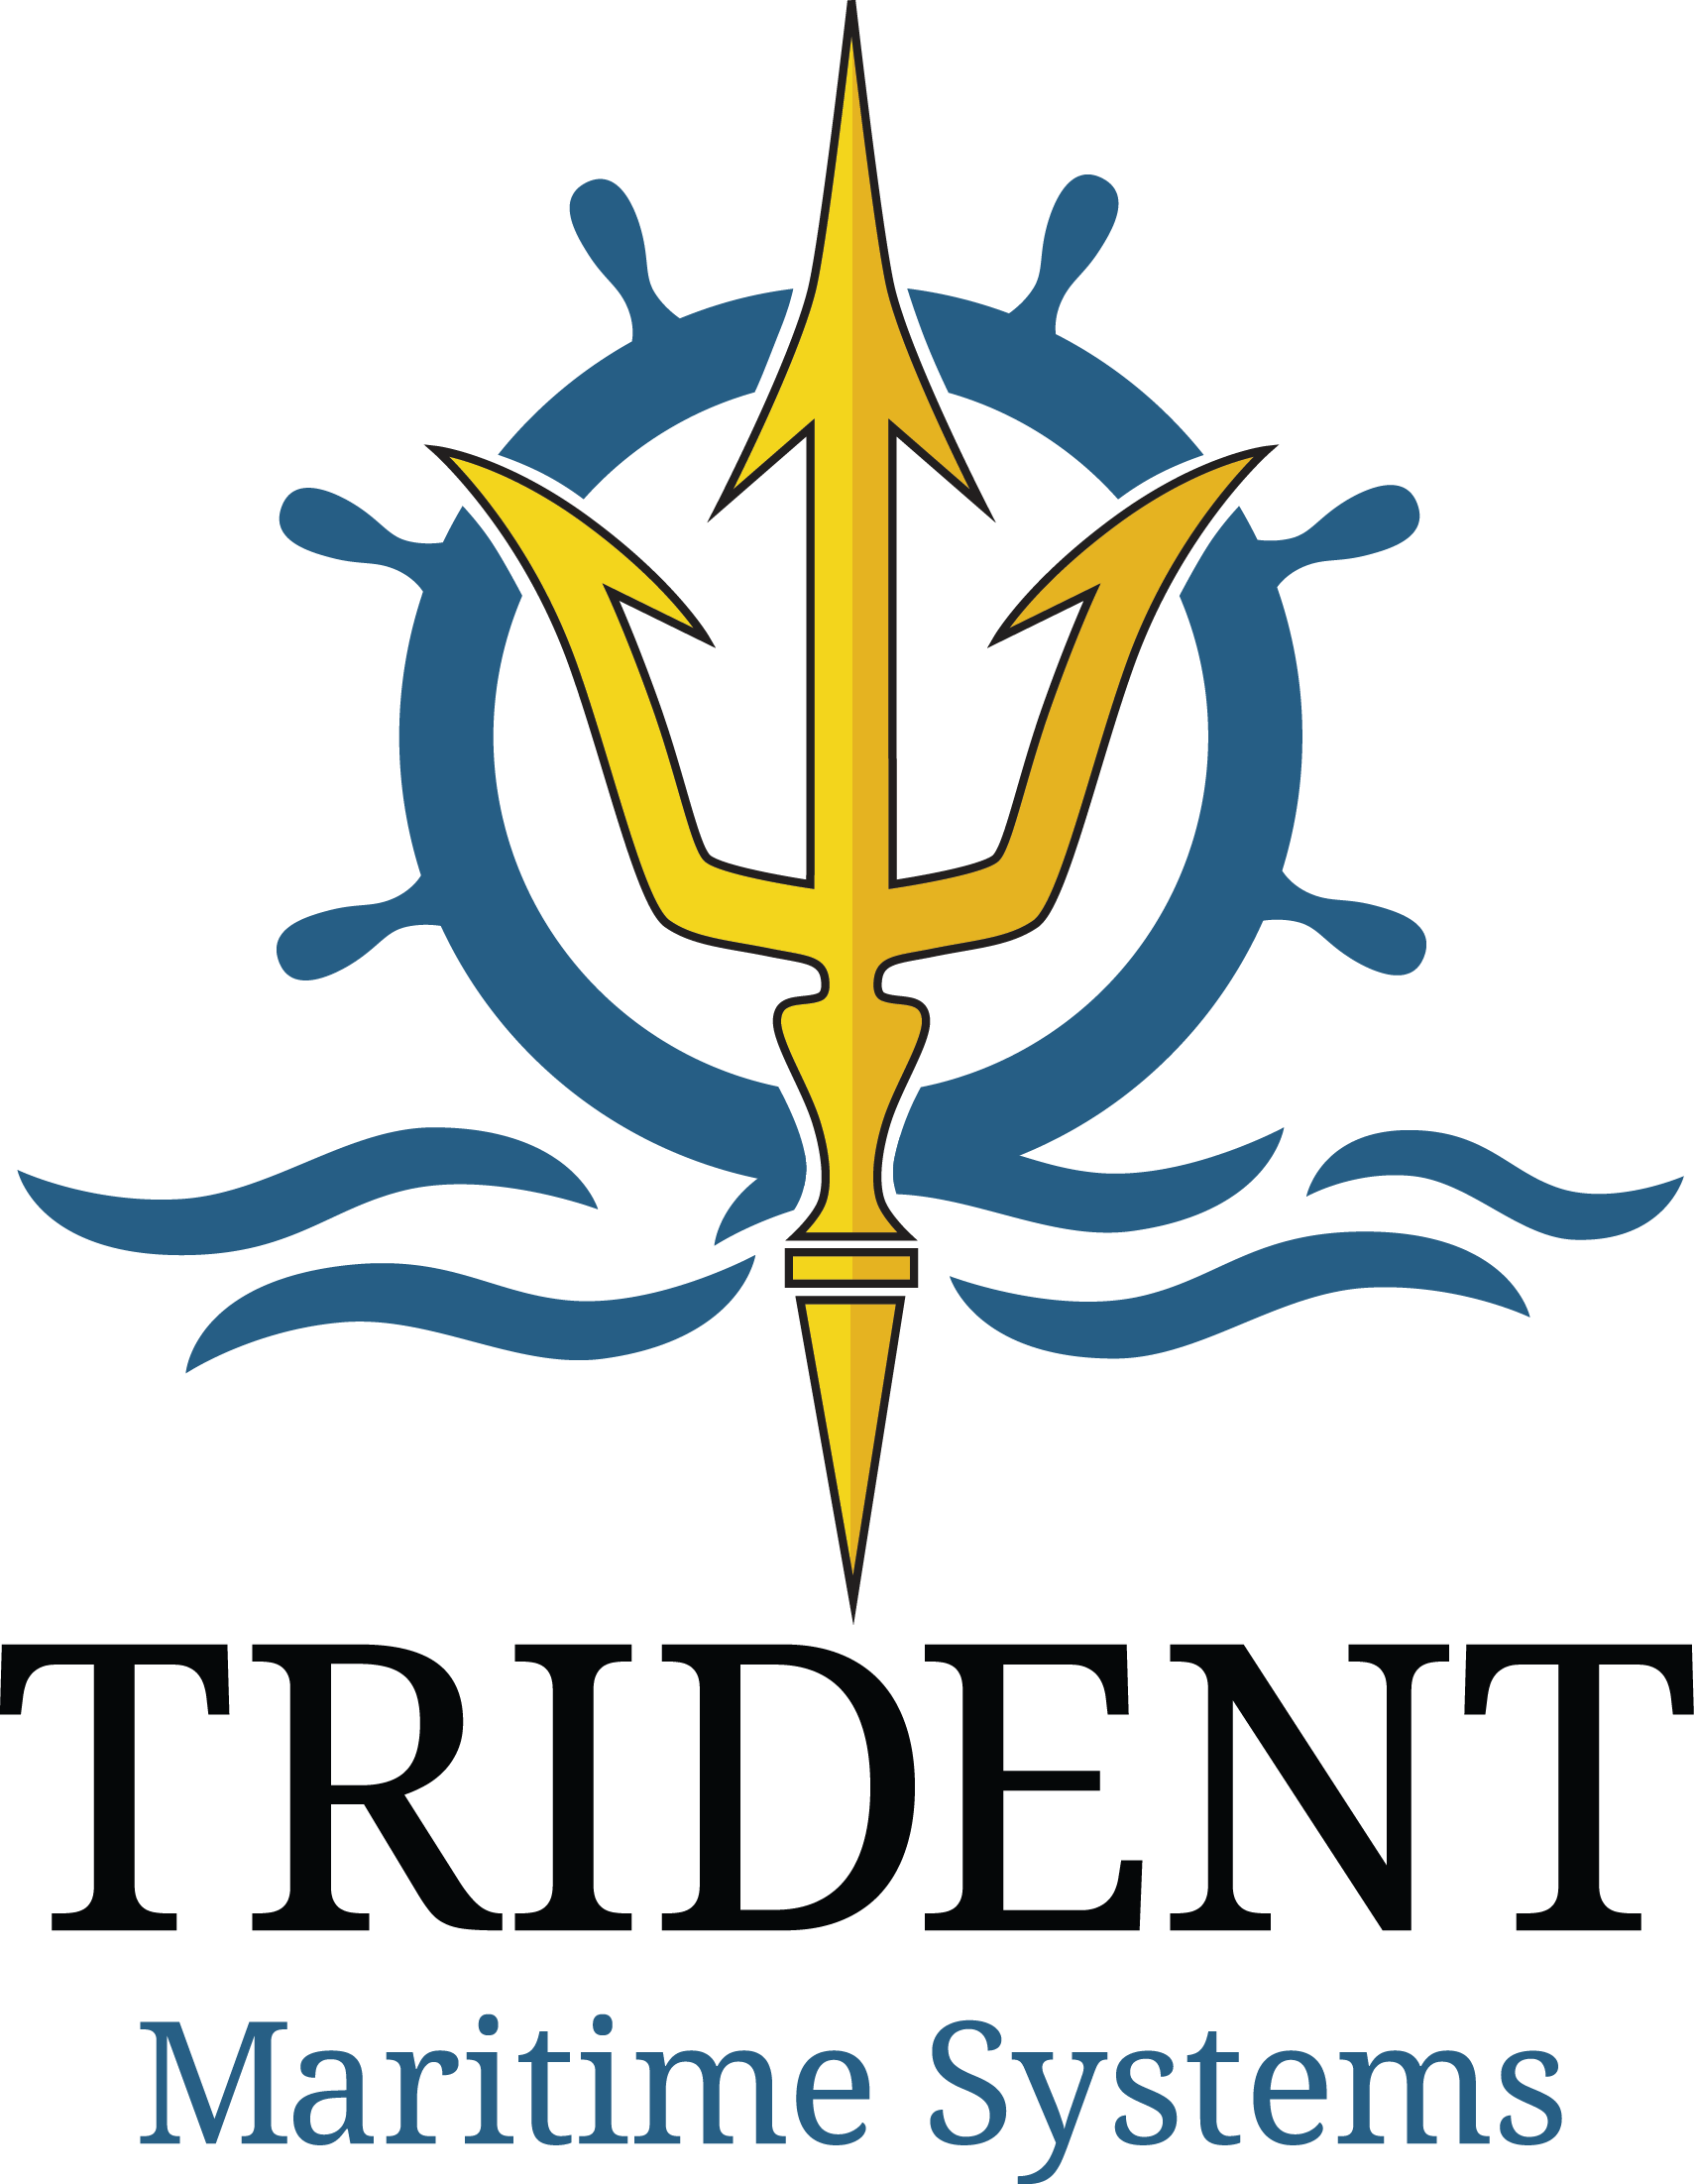 Trident Maritime Systems Announces Definitive Agreement to Acquire Callenberg Technology Group, August 15 2016